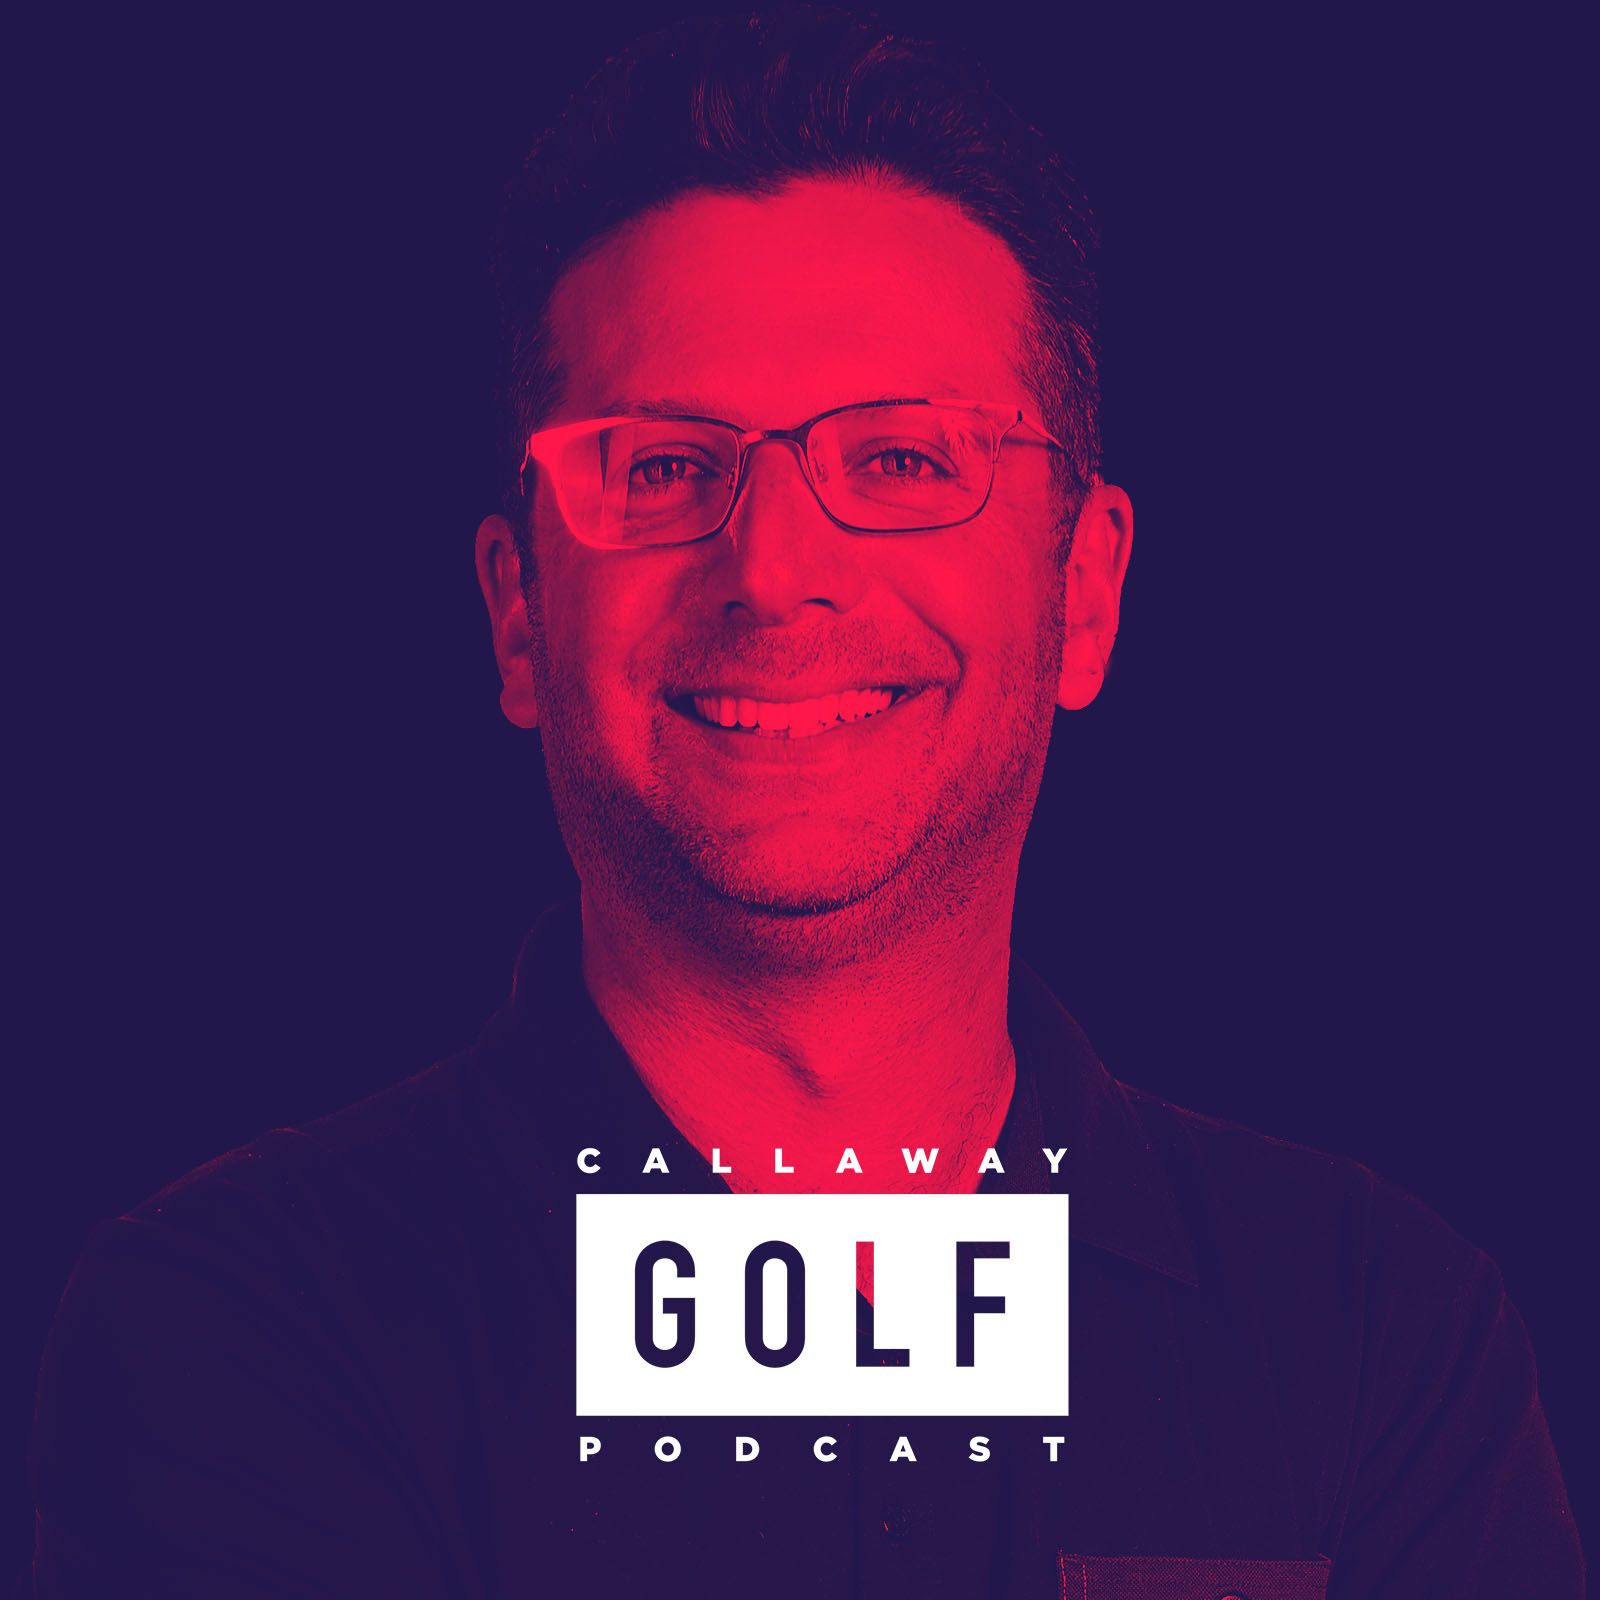 Stephen Curry Shares His Keys to Success For The Match 3 || Callaway Golf Podcast 402